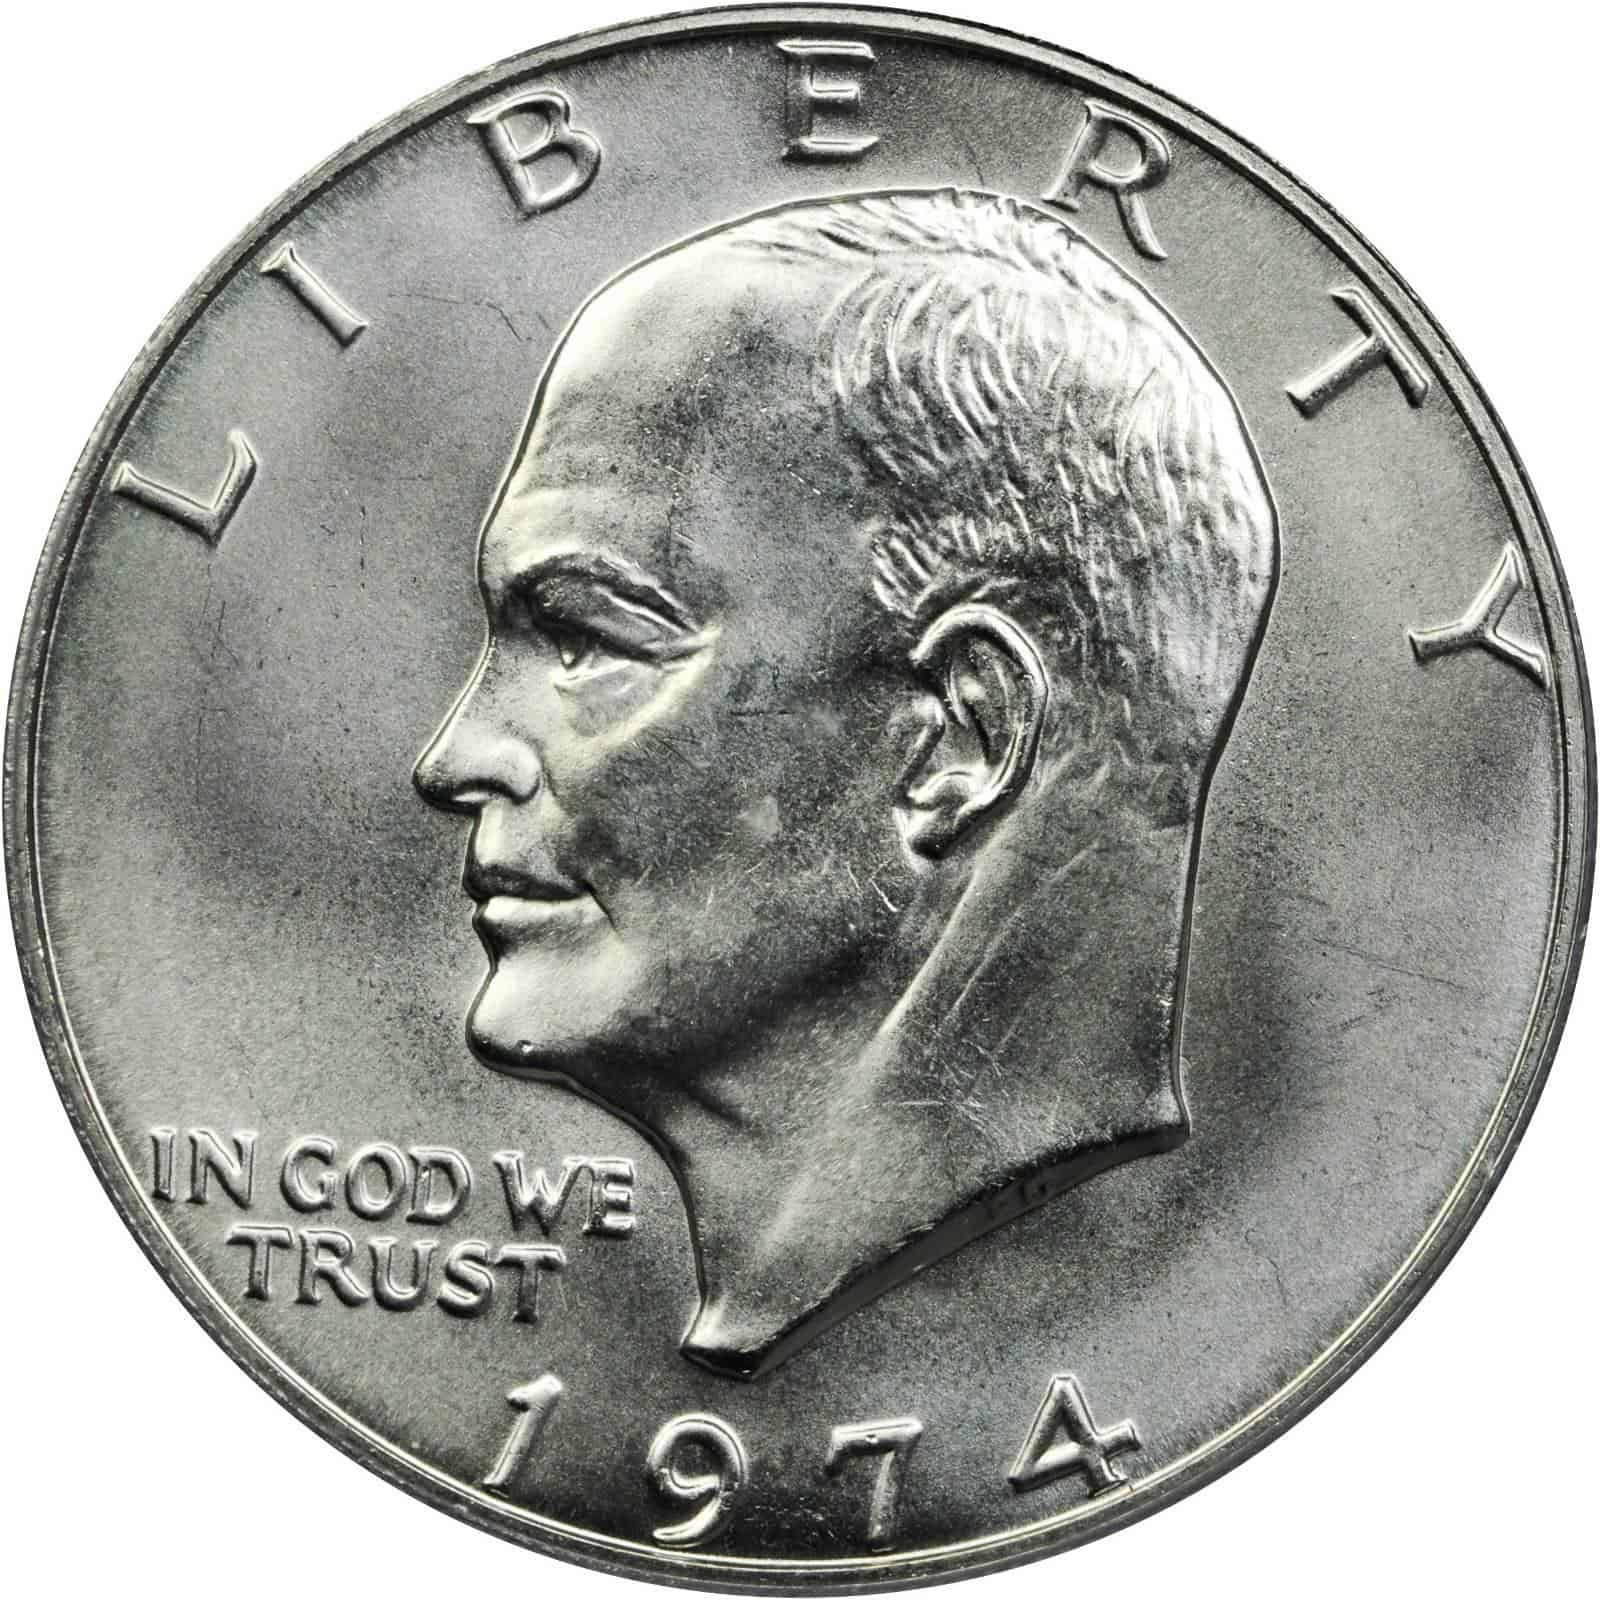 The obverse of the 1974 Eisenhower dollar